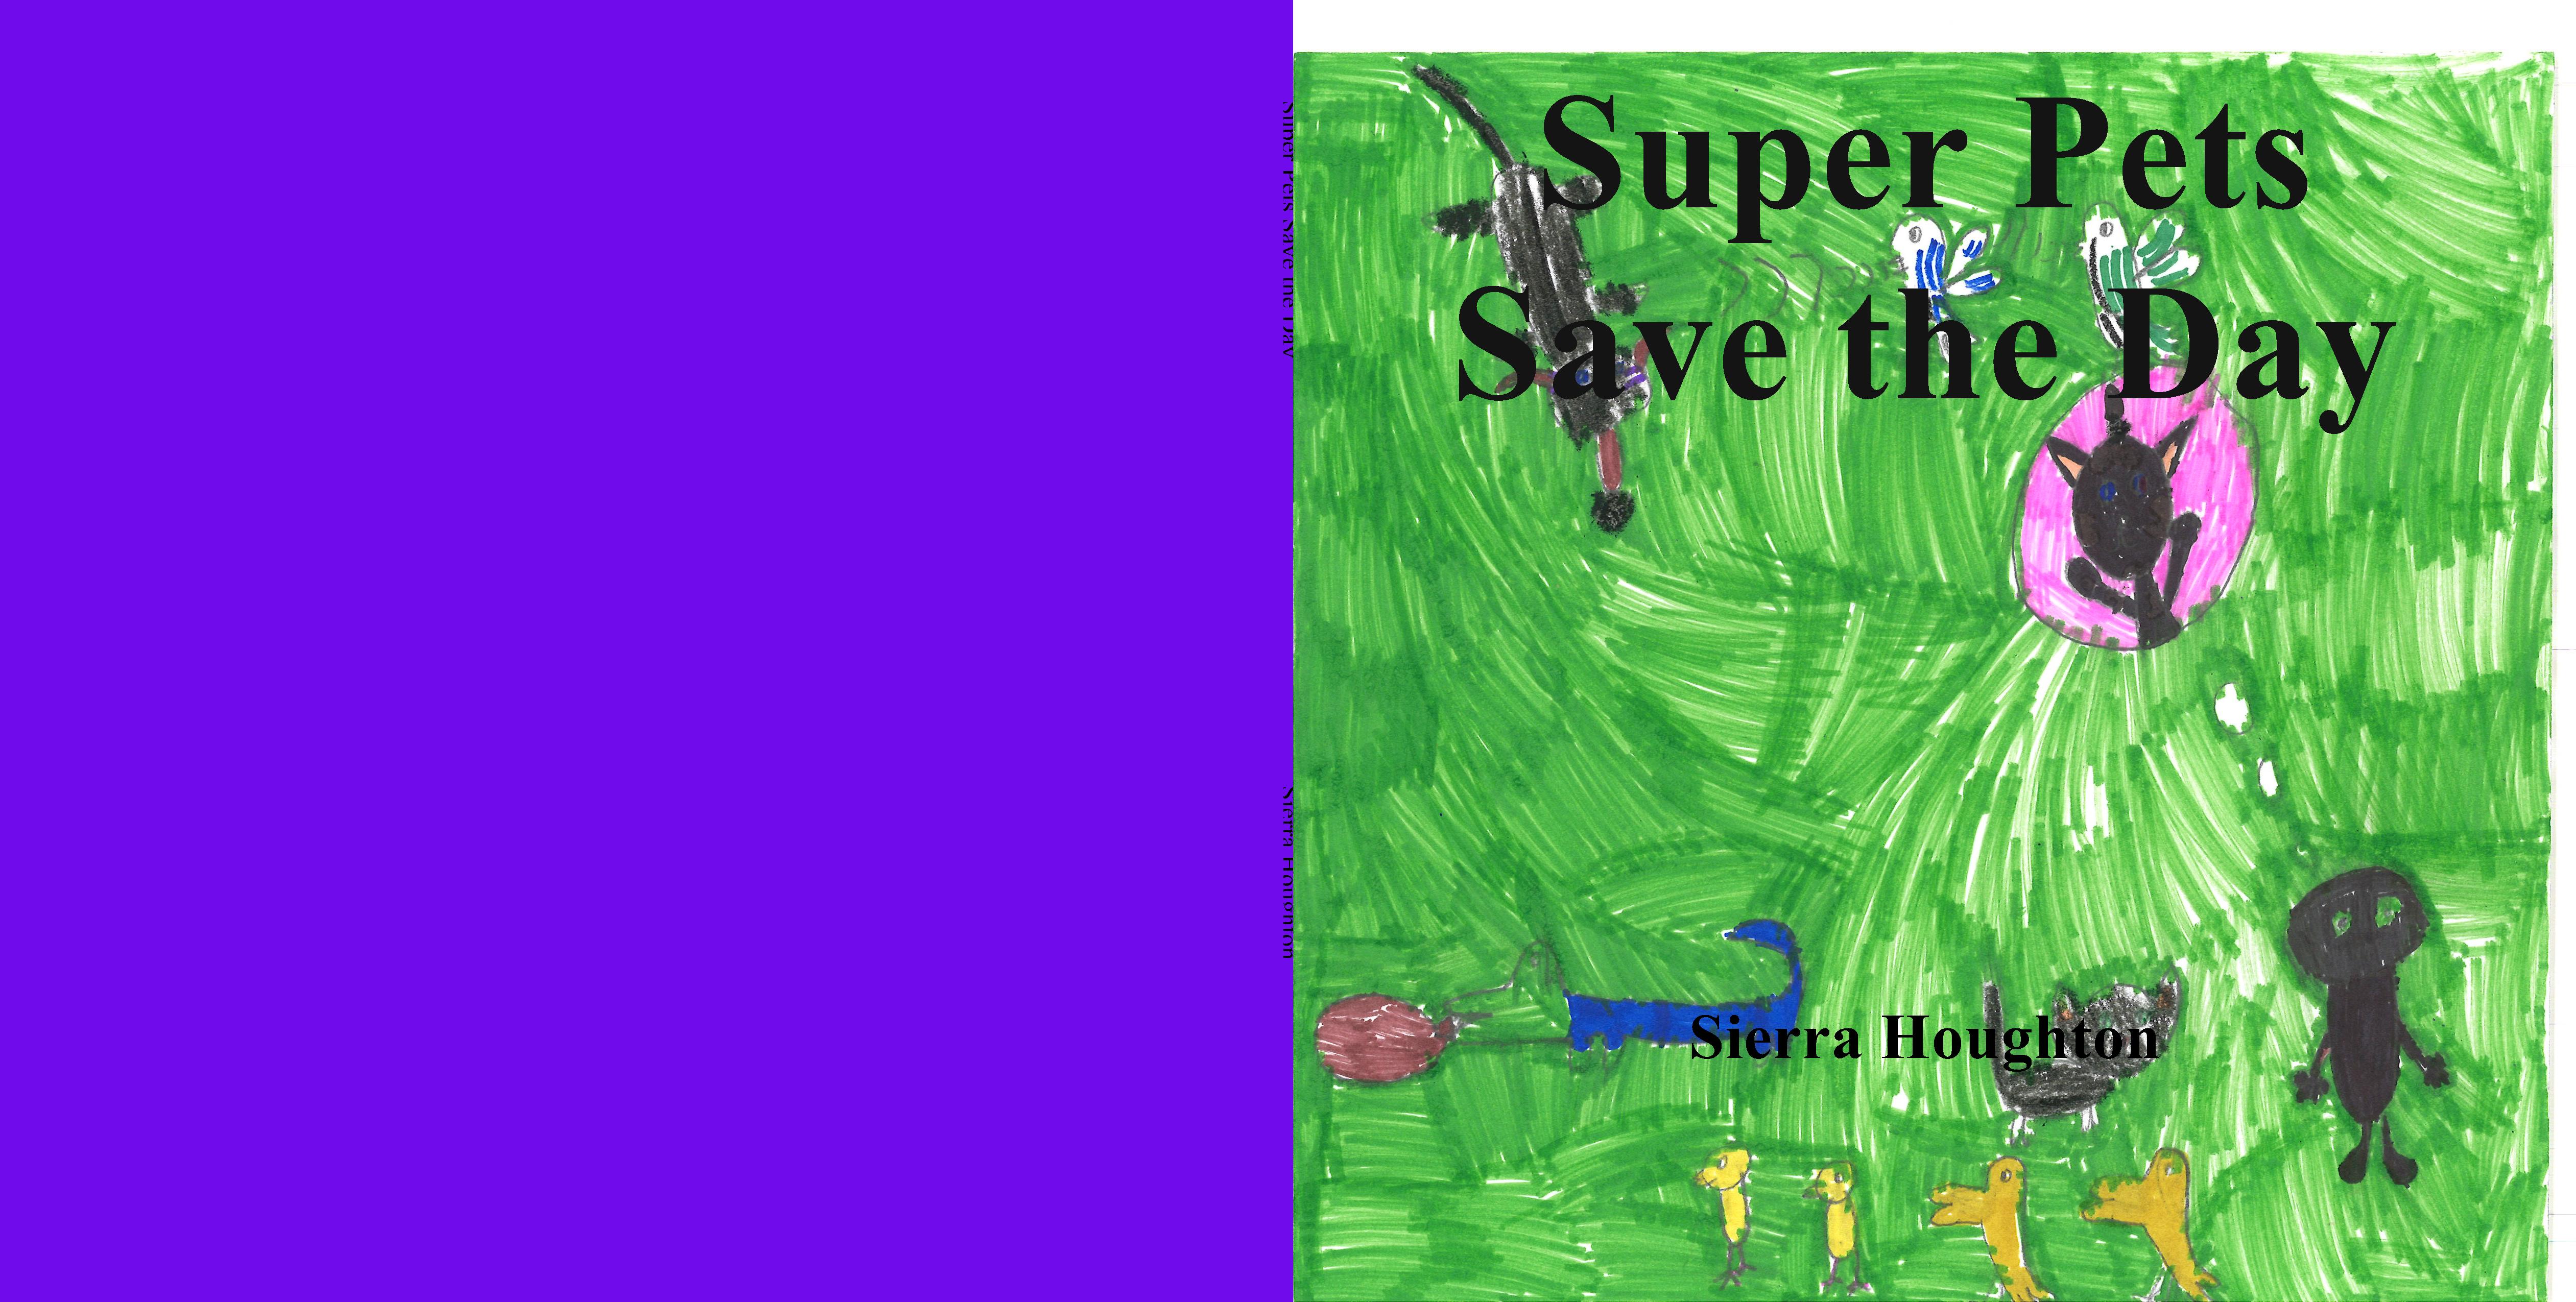 Super Pets Save the Day cover image